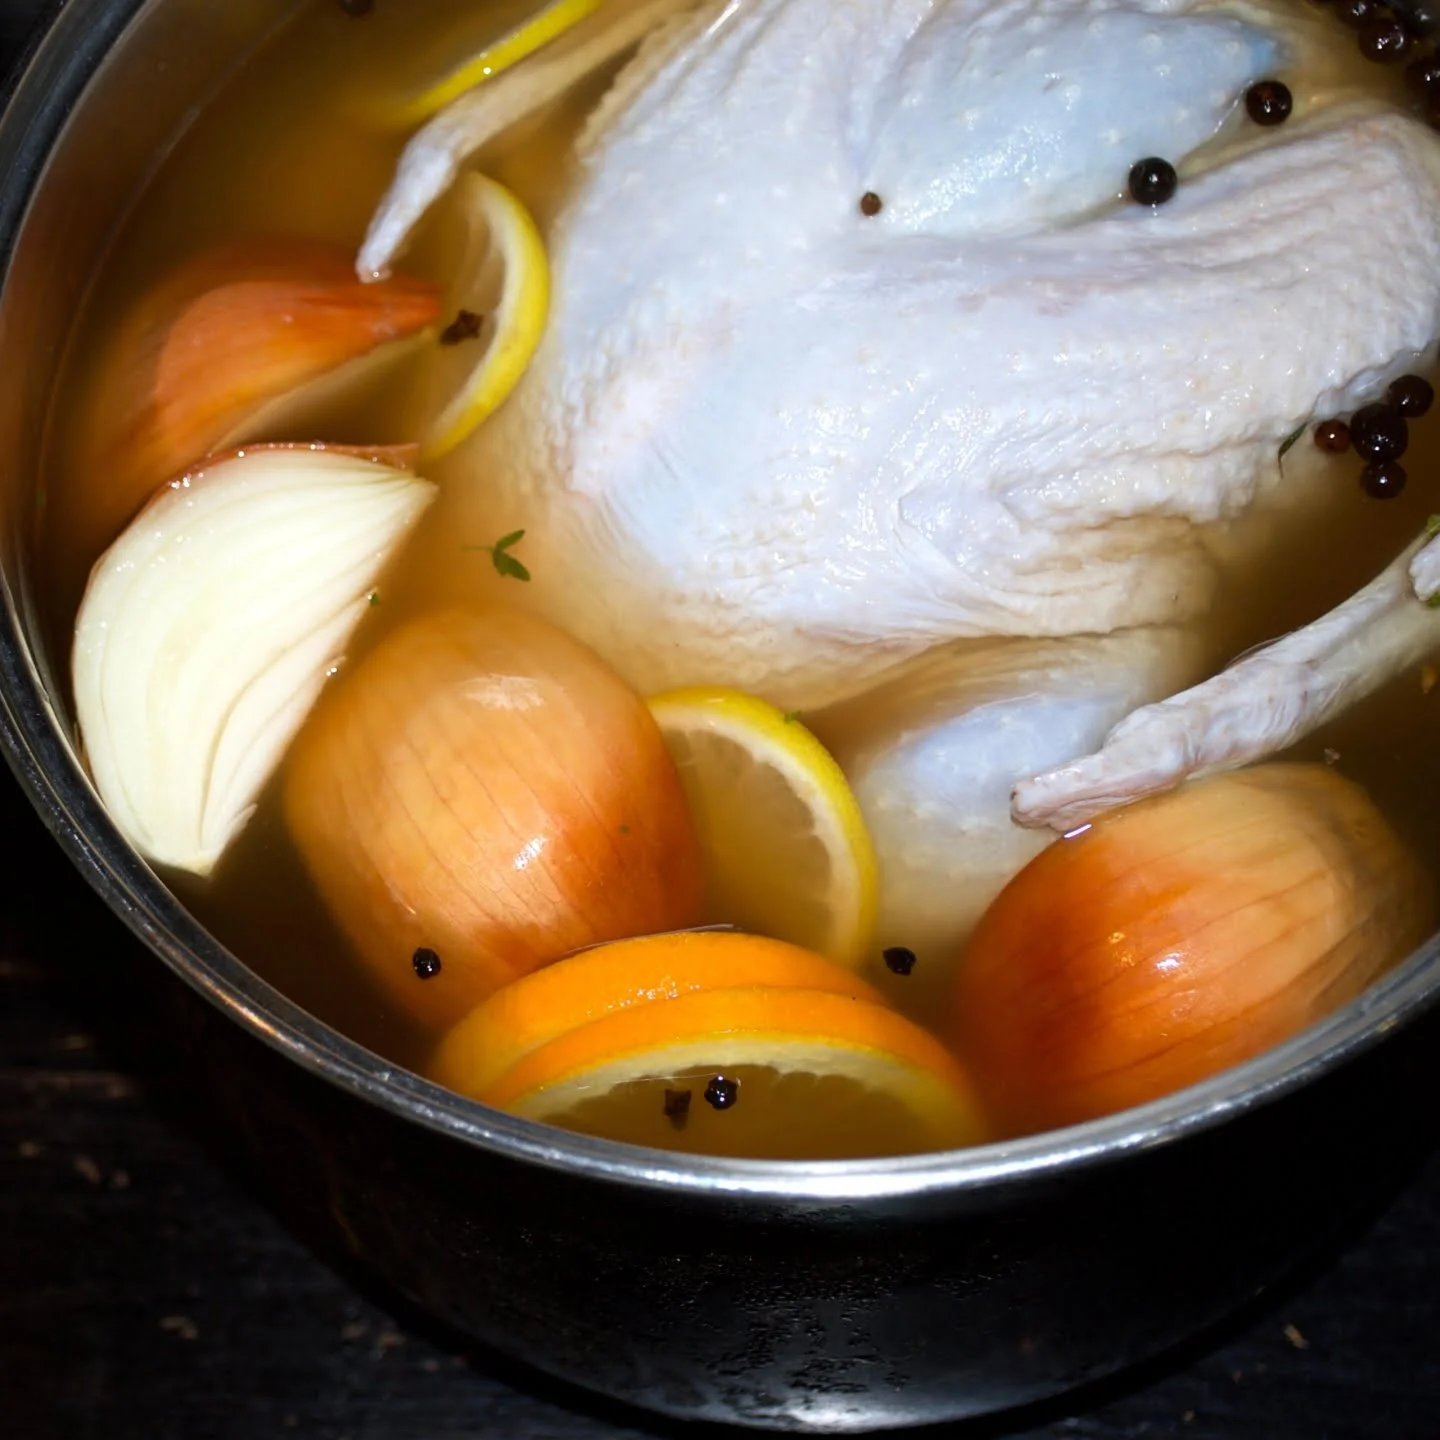 How to wet brine a turkey step-by-step. With herbs, spices, and flavor enhancers.